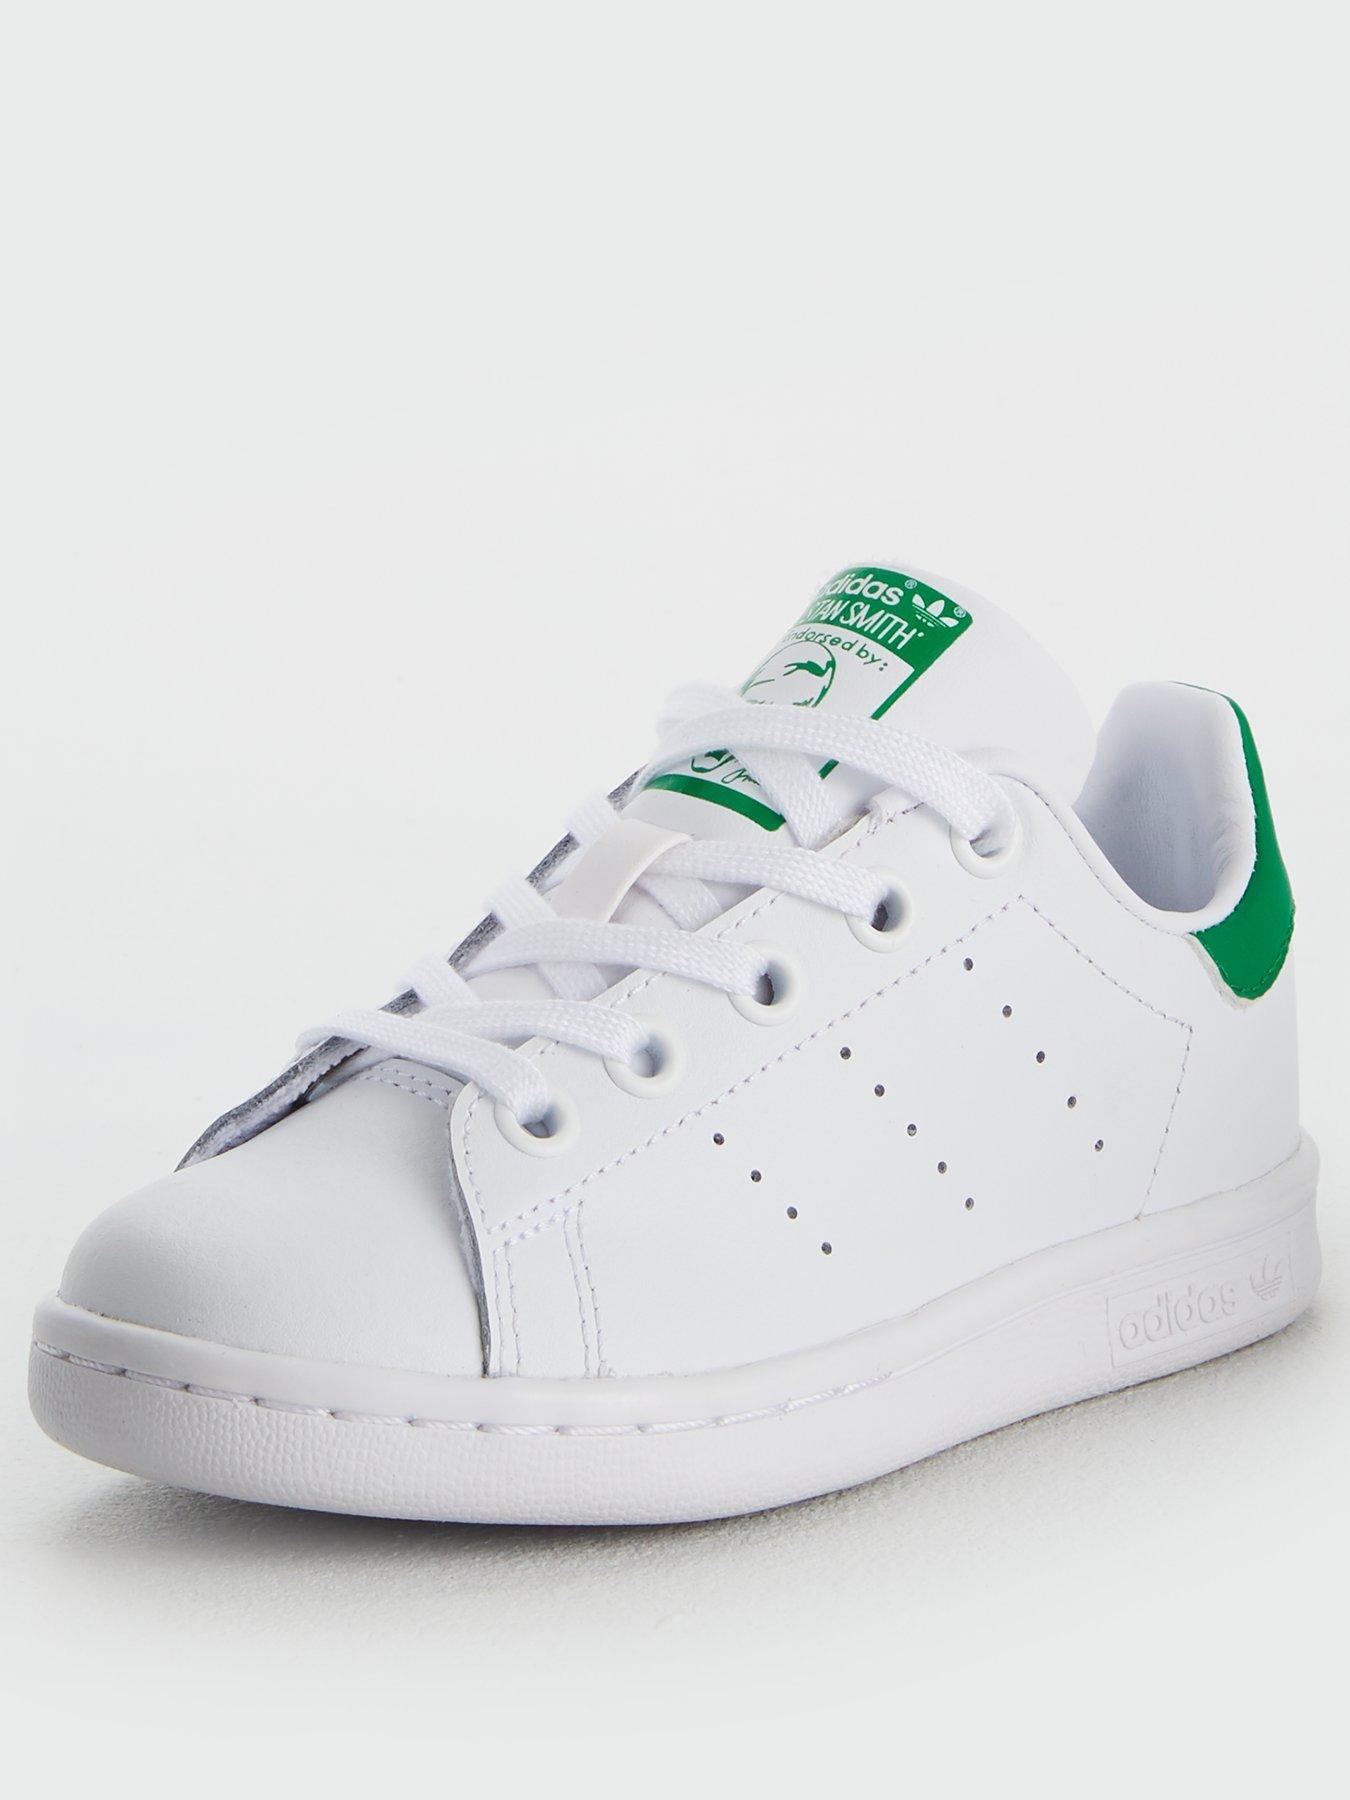 adidas kids' stan smith trainers - white/pink